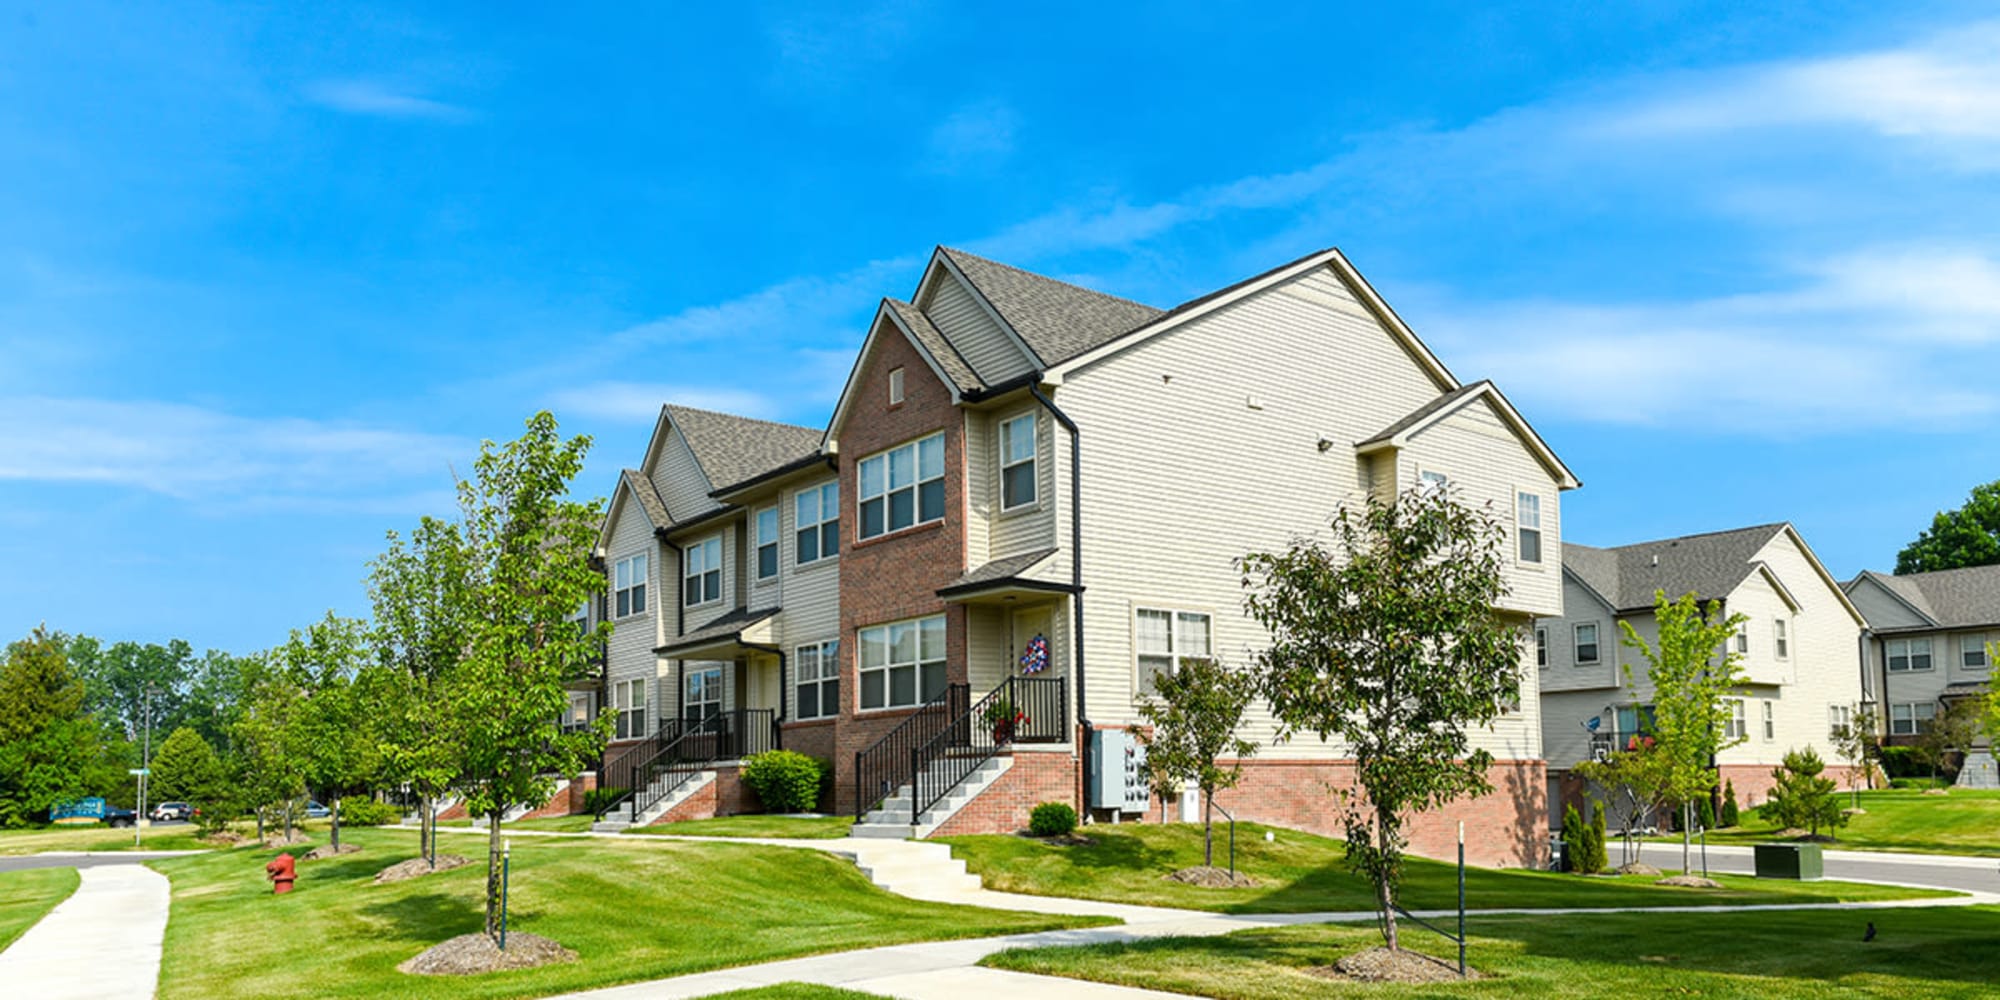 Quality buildings at Encore Townhomes in Utica, Michigan